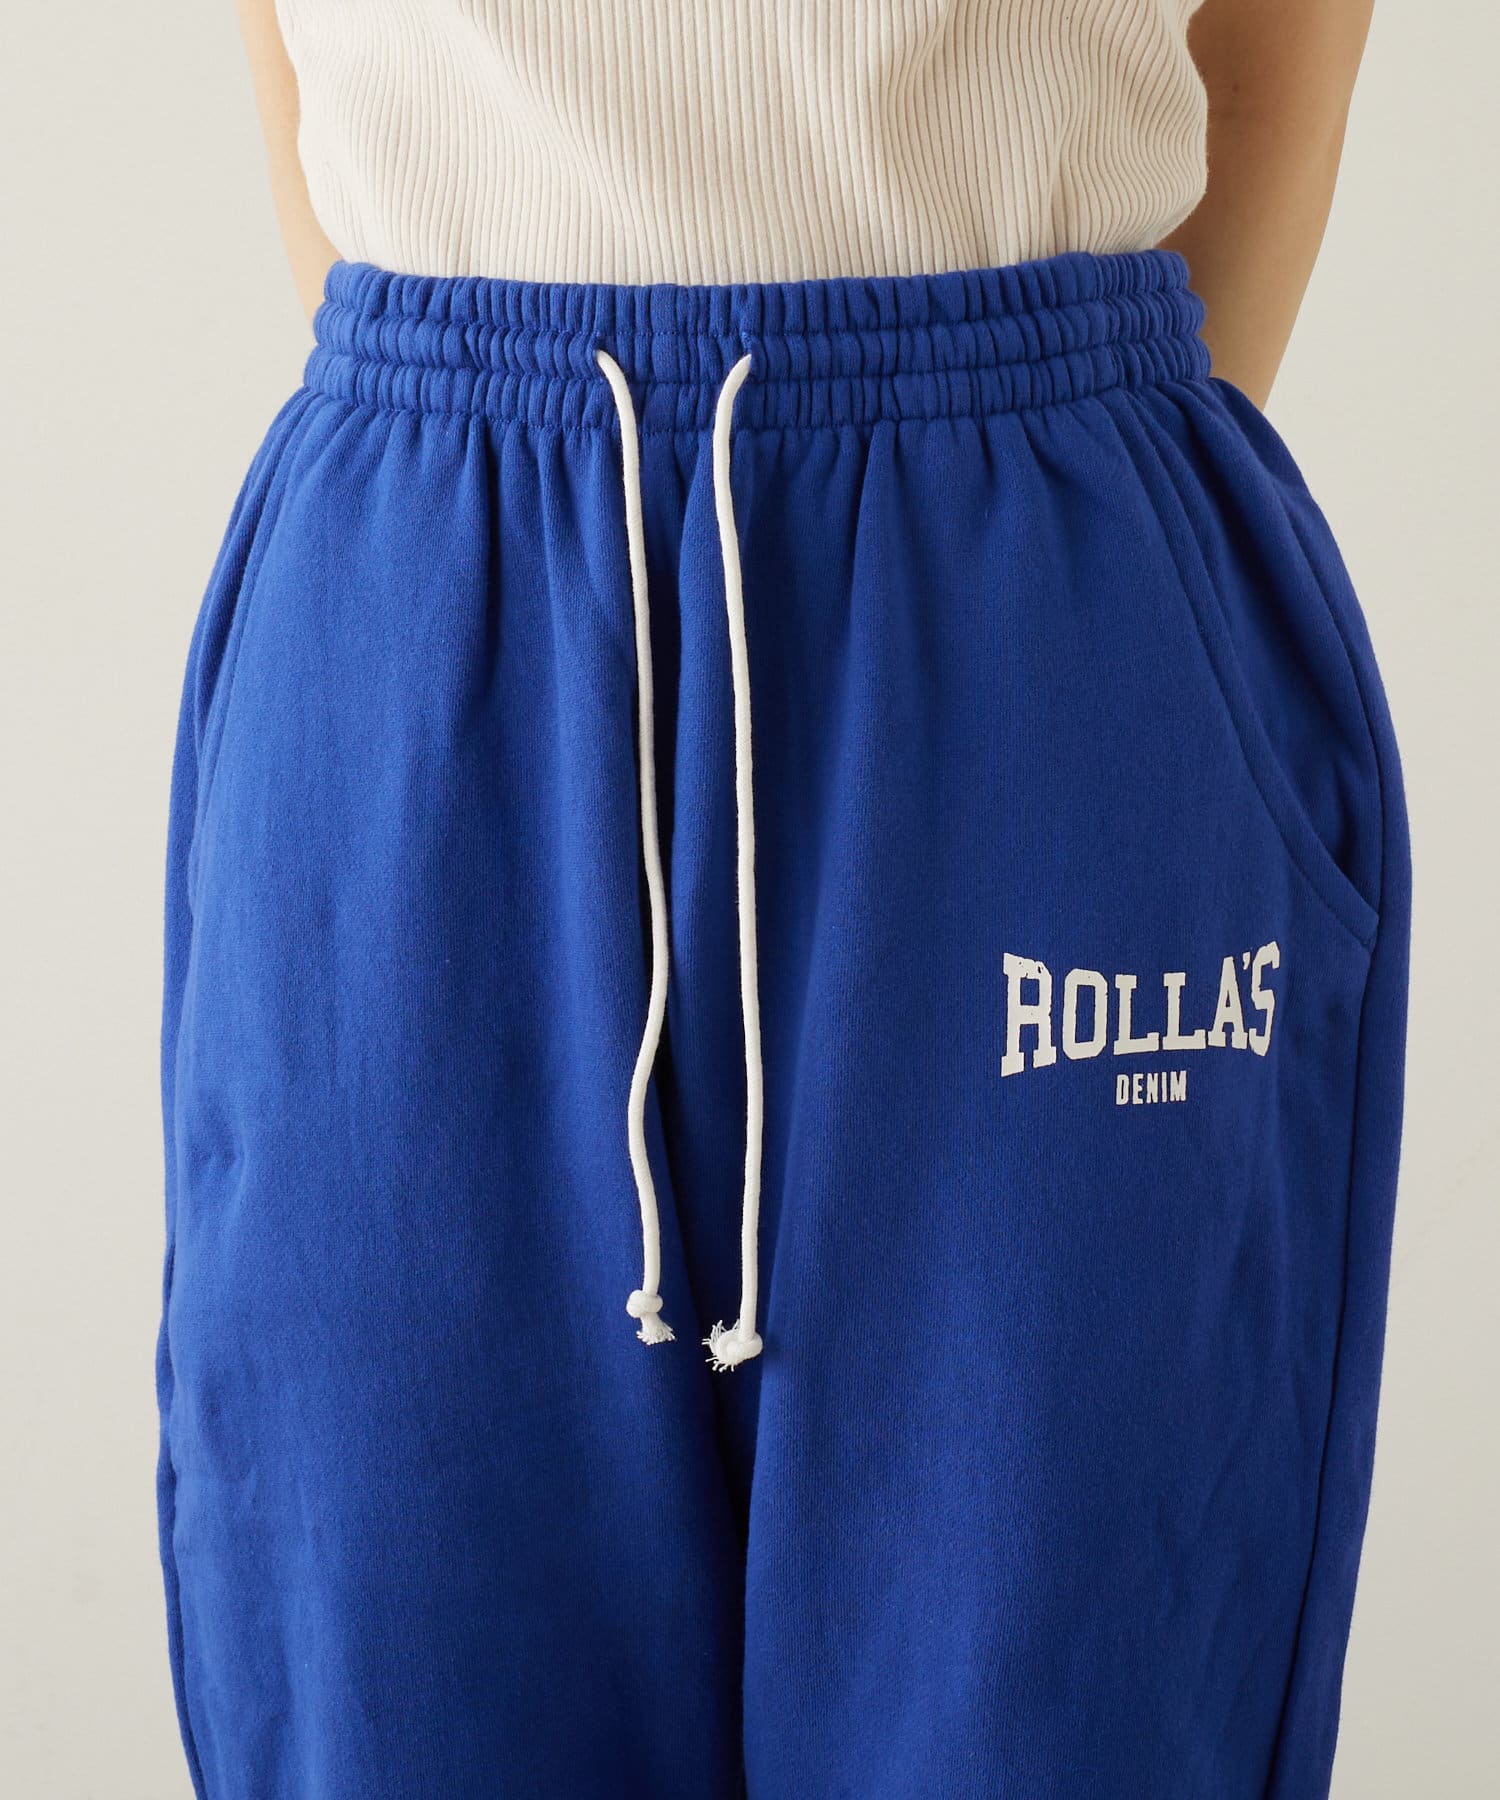 Chico(チコ) ROLLA'S WORKOUT JOGGER PANT